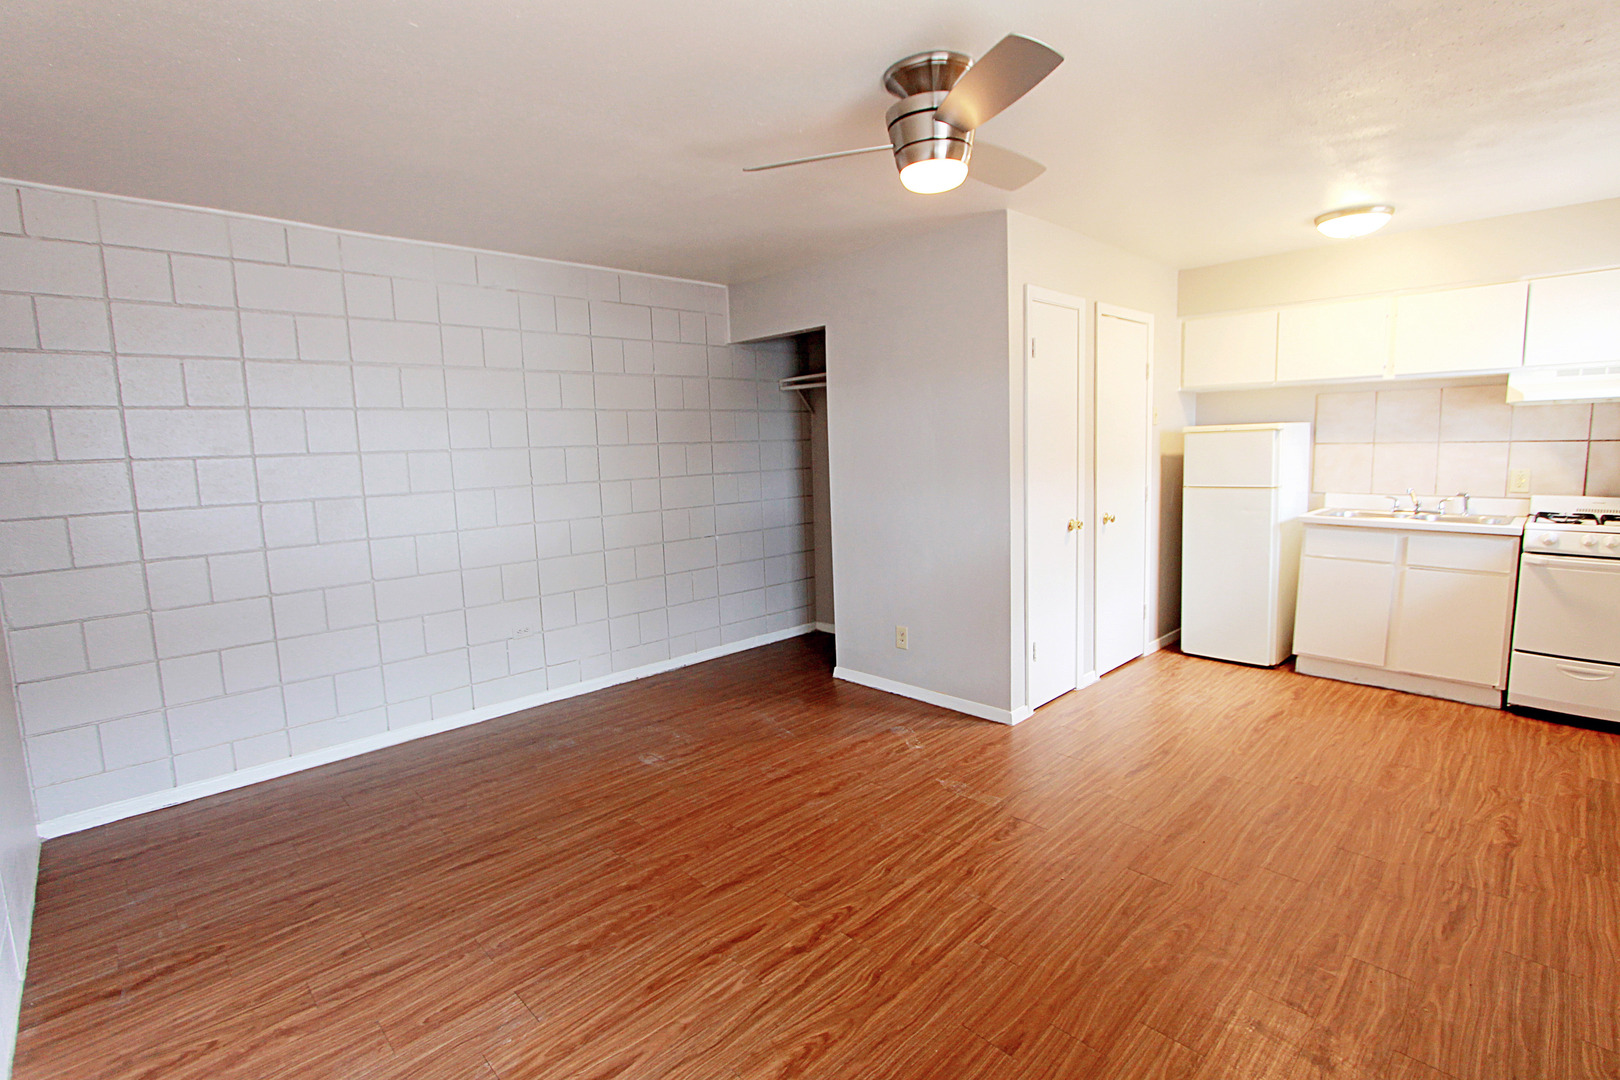 Recently Remodeled Studio Apartment In Hot East Austin!